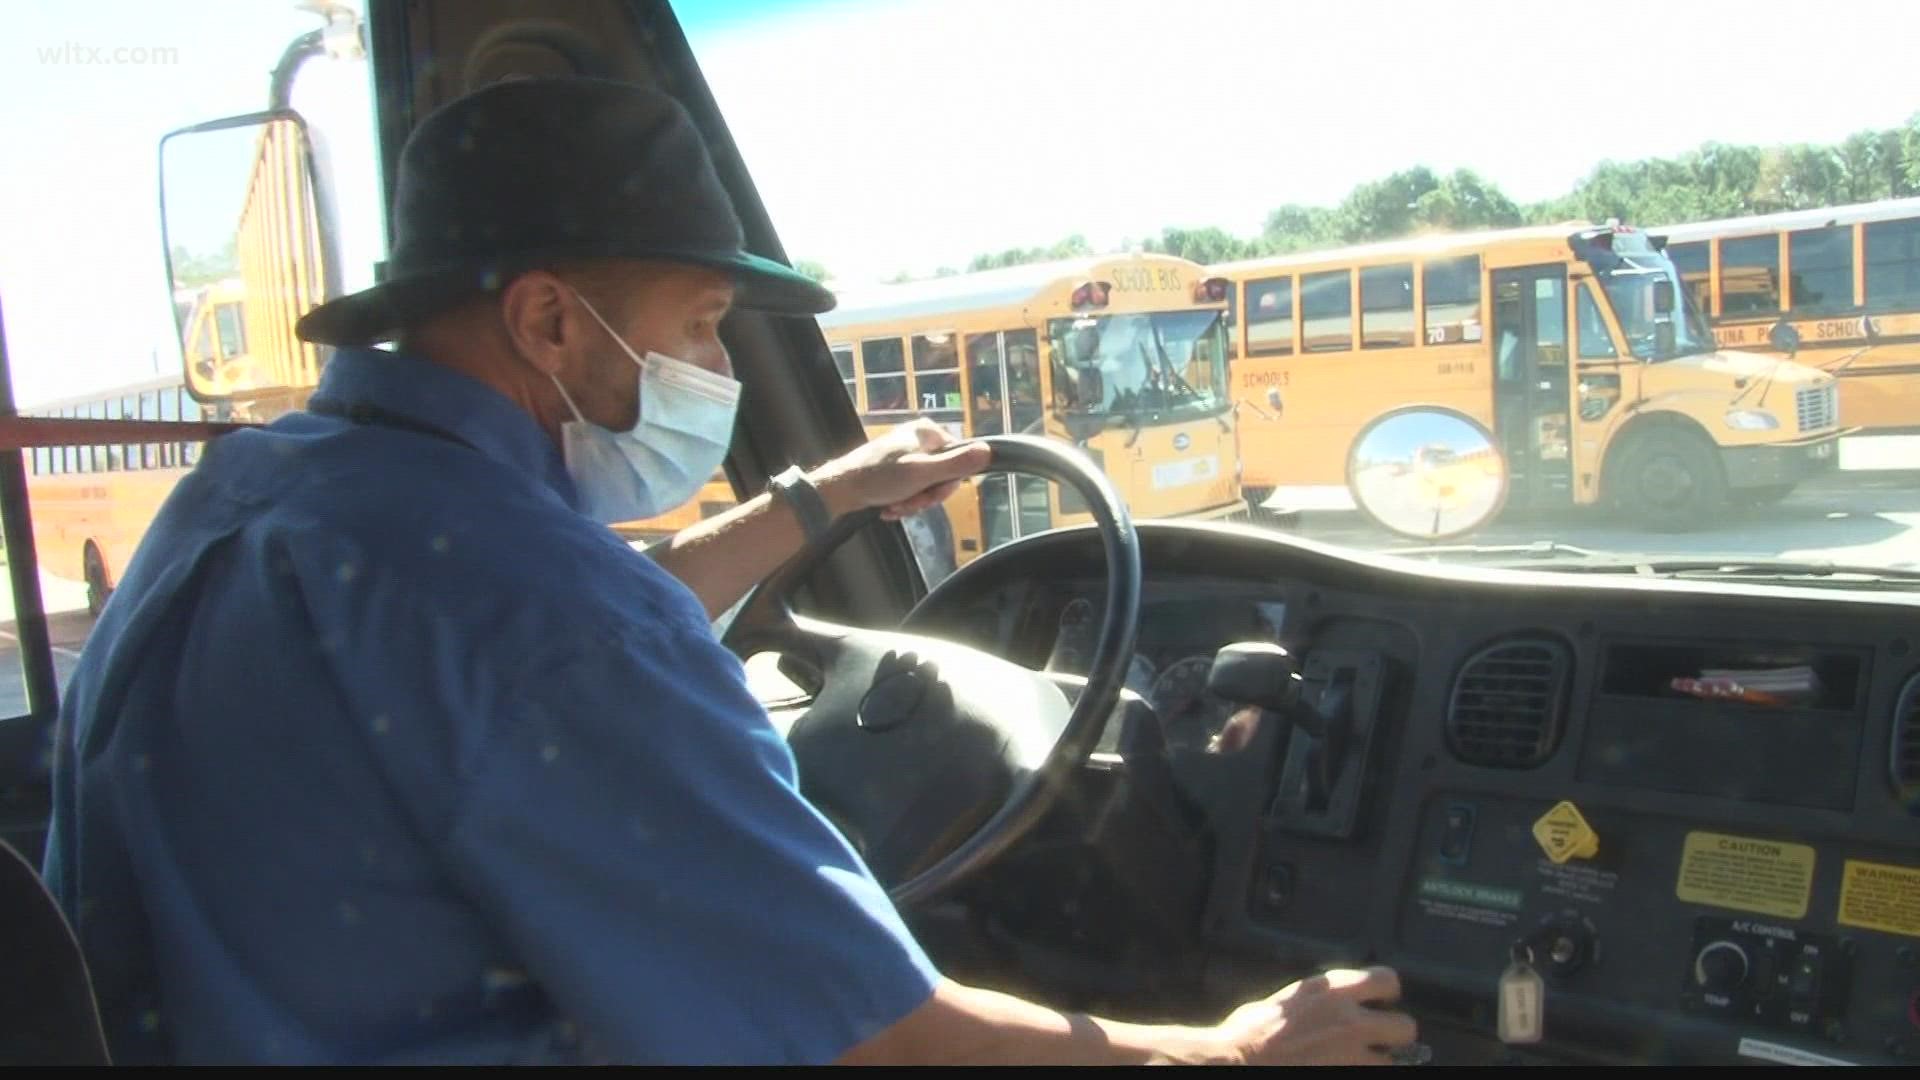 Some school bus drivers in the Midlands are having to drive extra routes and wait times are increasing.